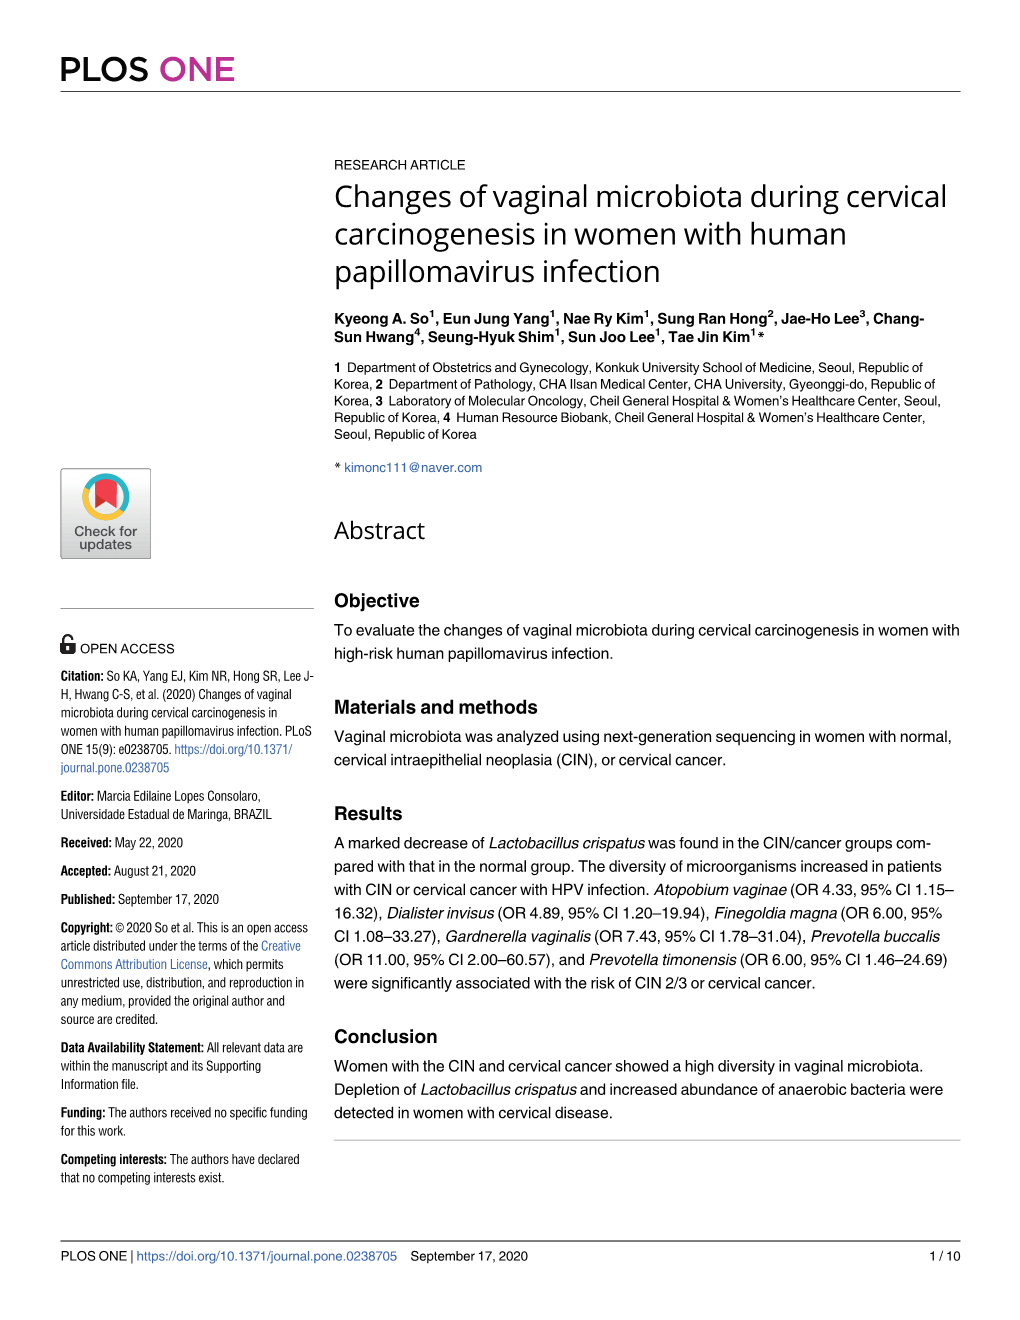 Changes of Vaginal Microbiota During Cervical Carcinogenesis in Women with Human Papillomavirus Infection